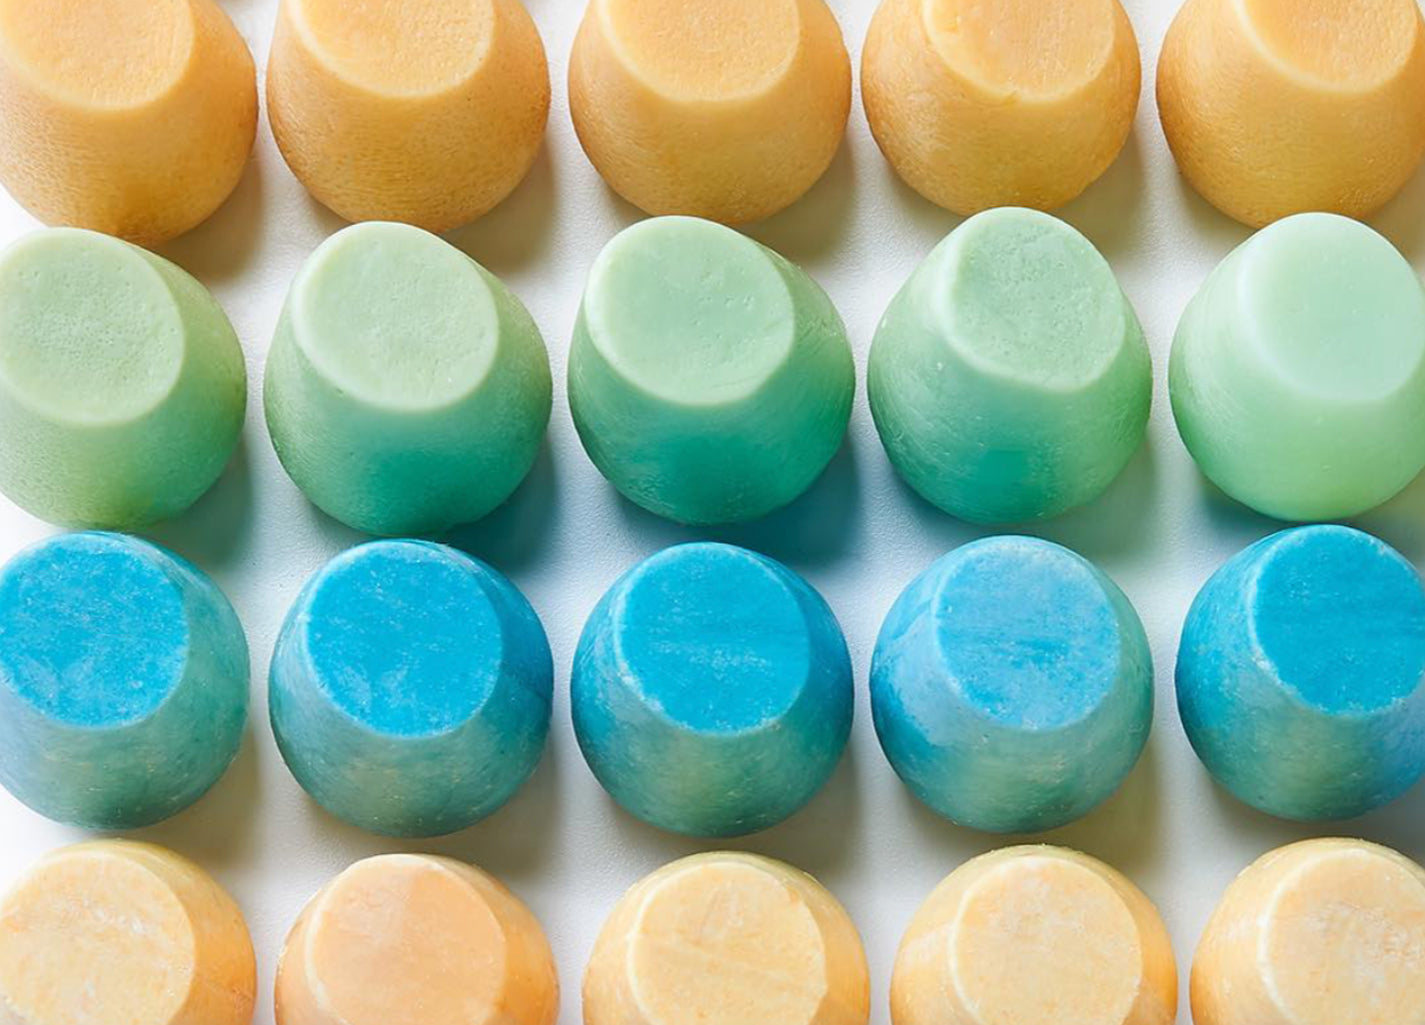 a collection shampoo bars next to each other showing the bright colors of bars